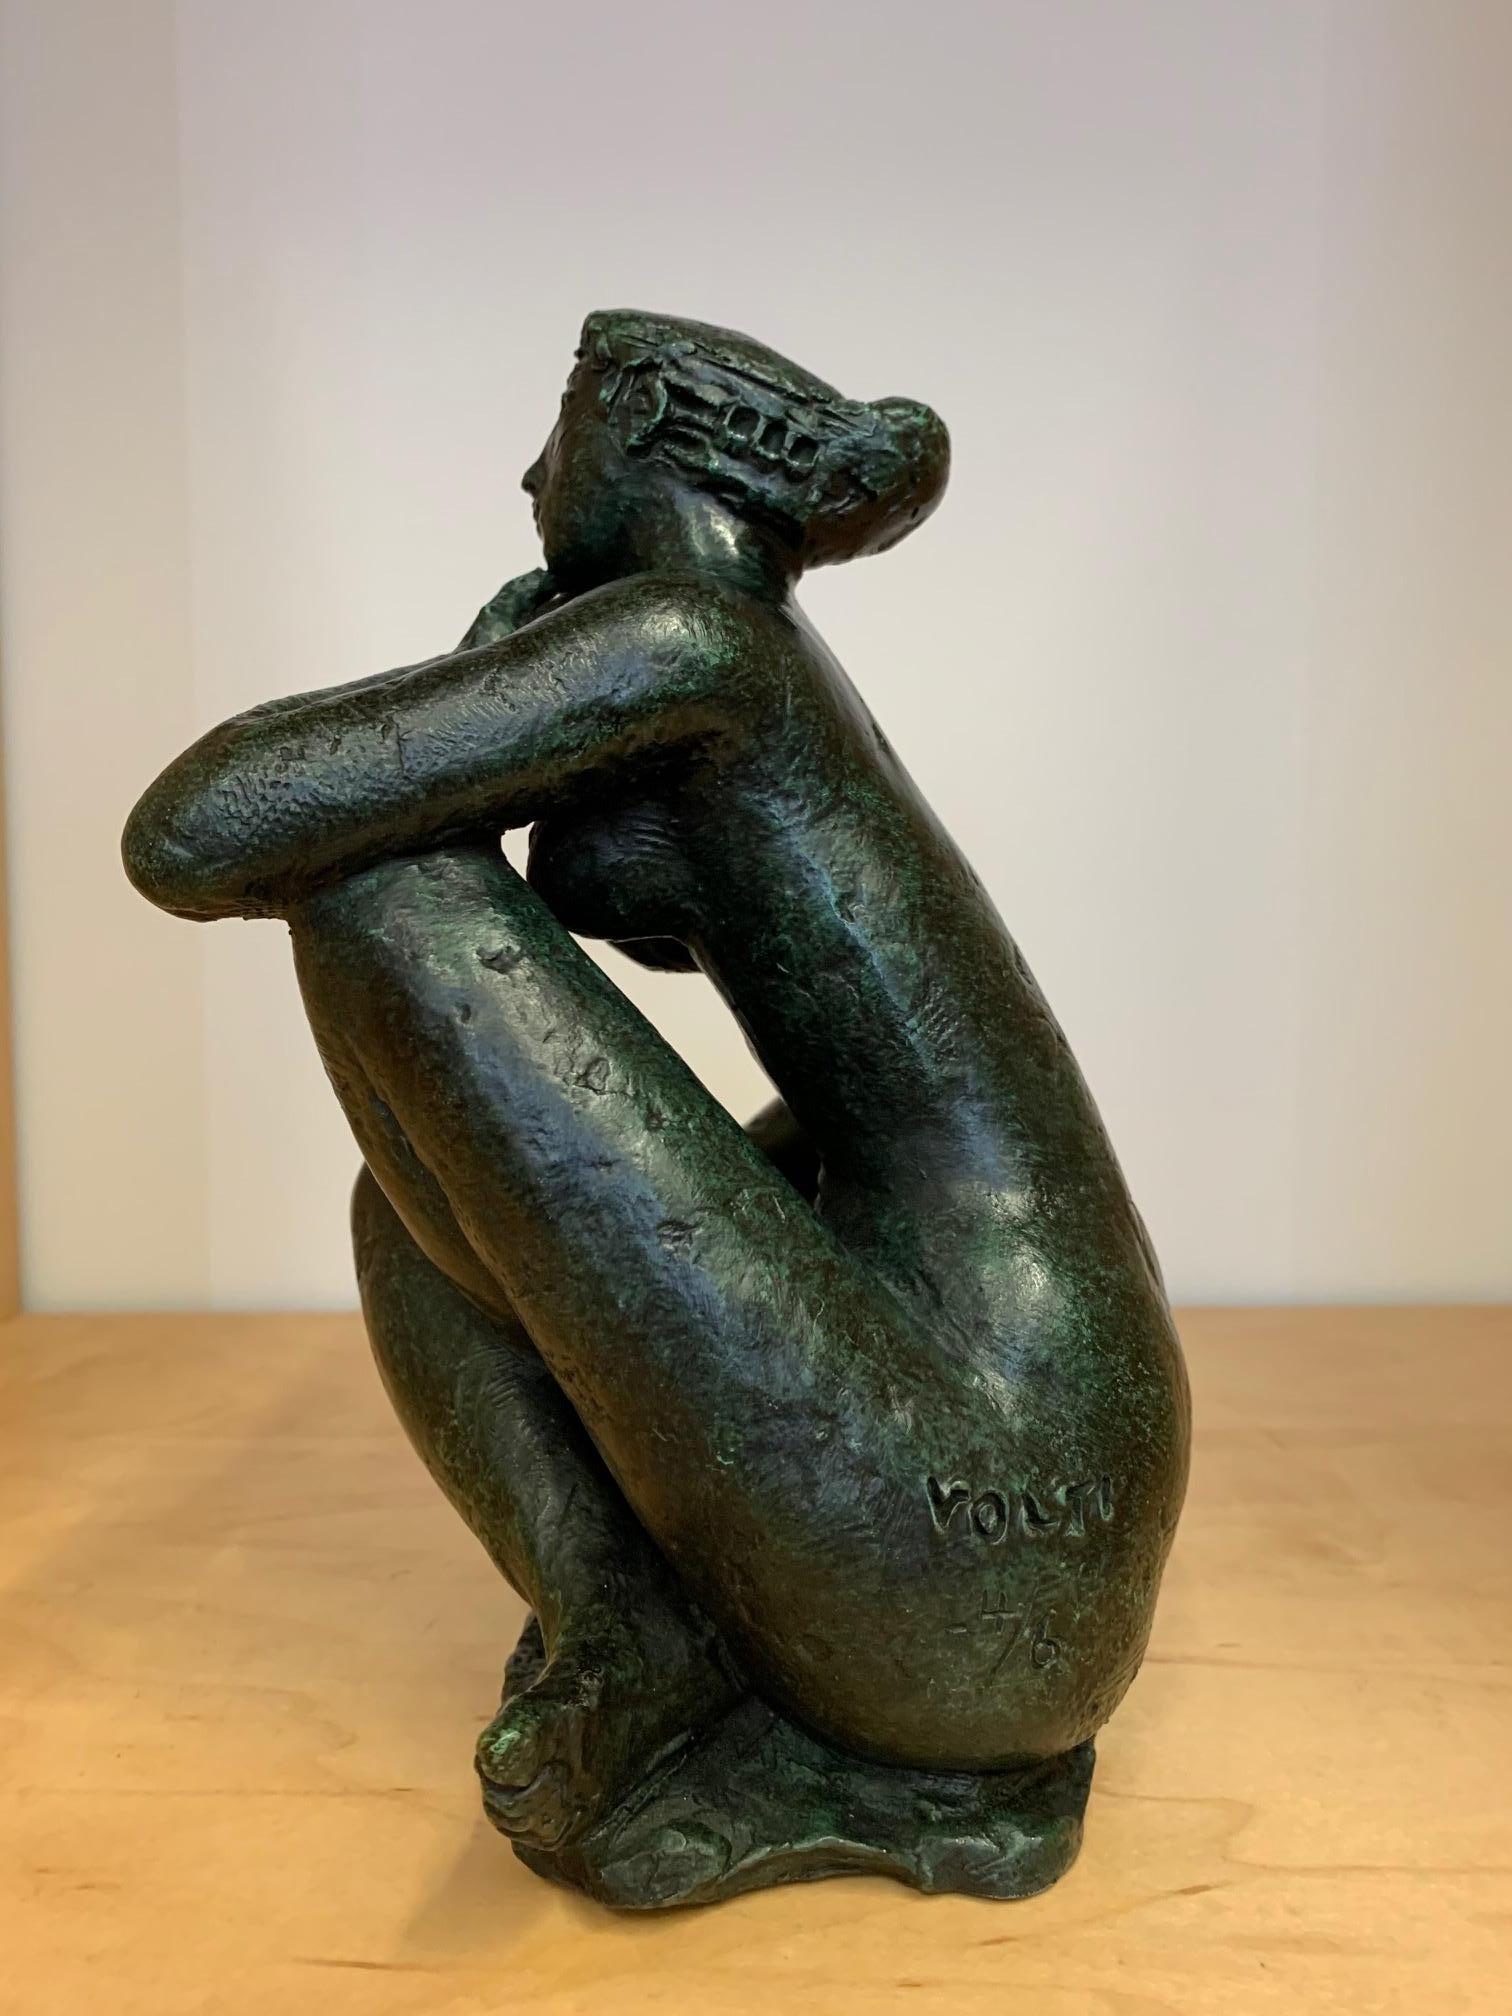 This small, bronze, female figurative sculpture by Antoniucci Volti, has a beautiful green patina finish to the bronze.

Antoniucci Volti, from his real name Voltigero, was a French sculptor, draftsman and engraver of Italian origins, born in 1915